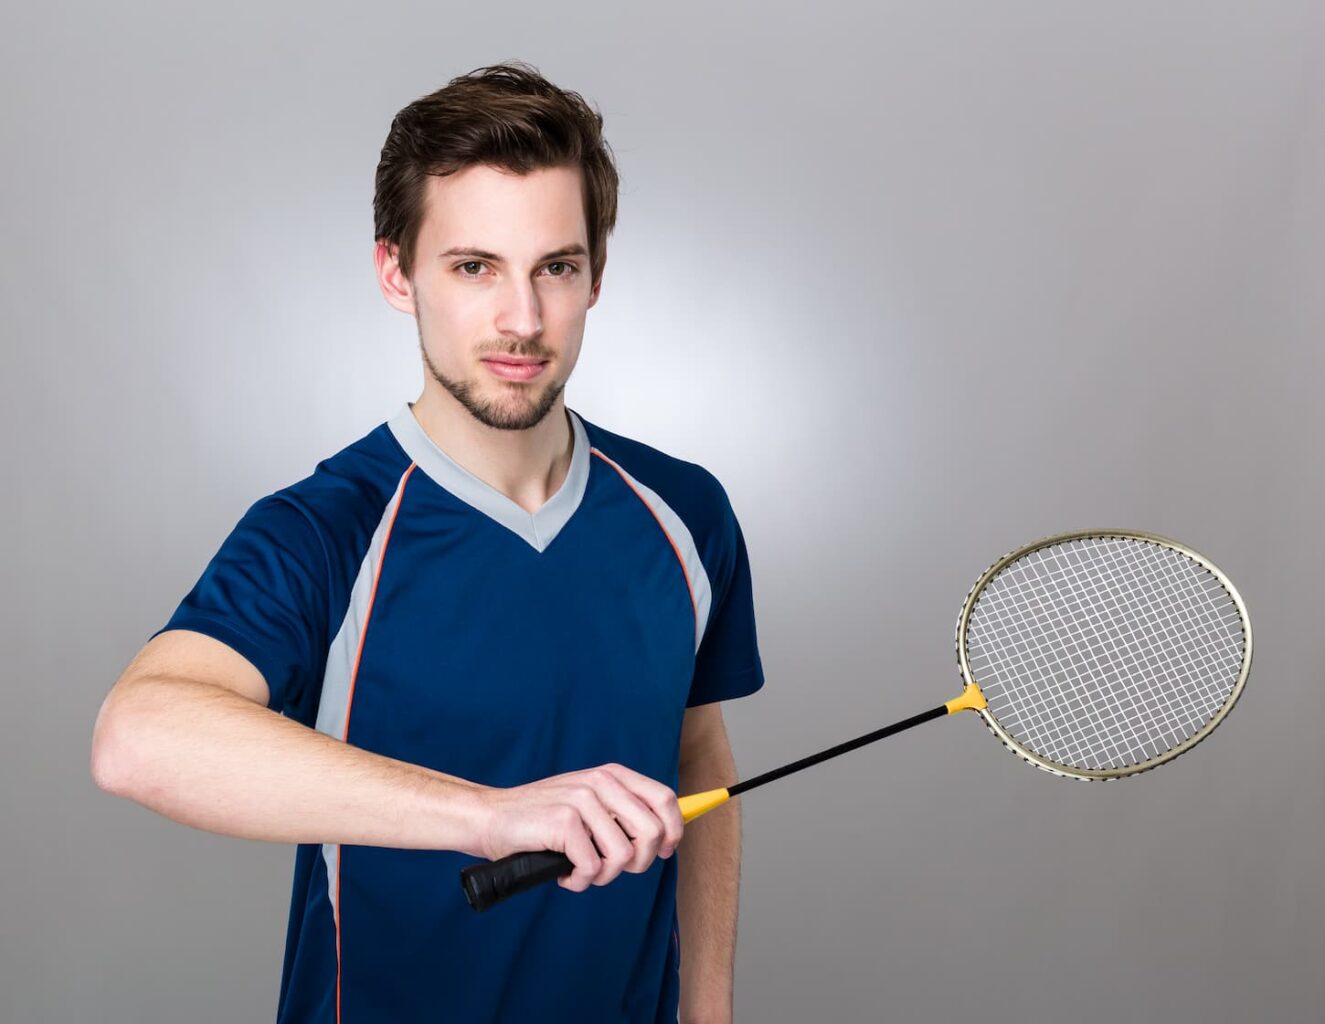 An image of a Sportsman holding a  badminton racket.